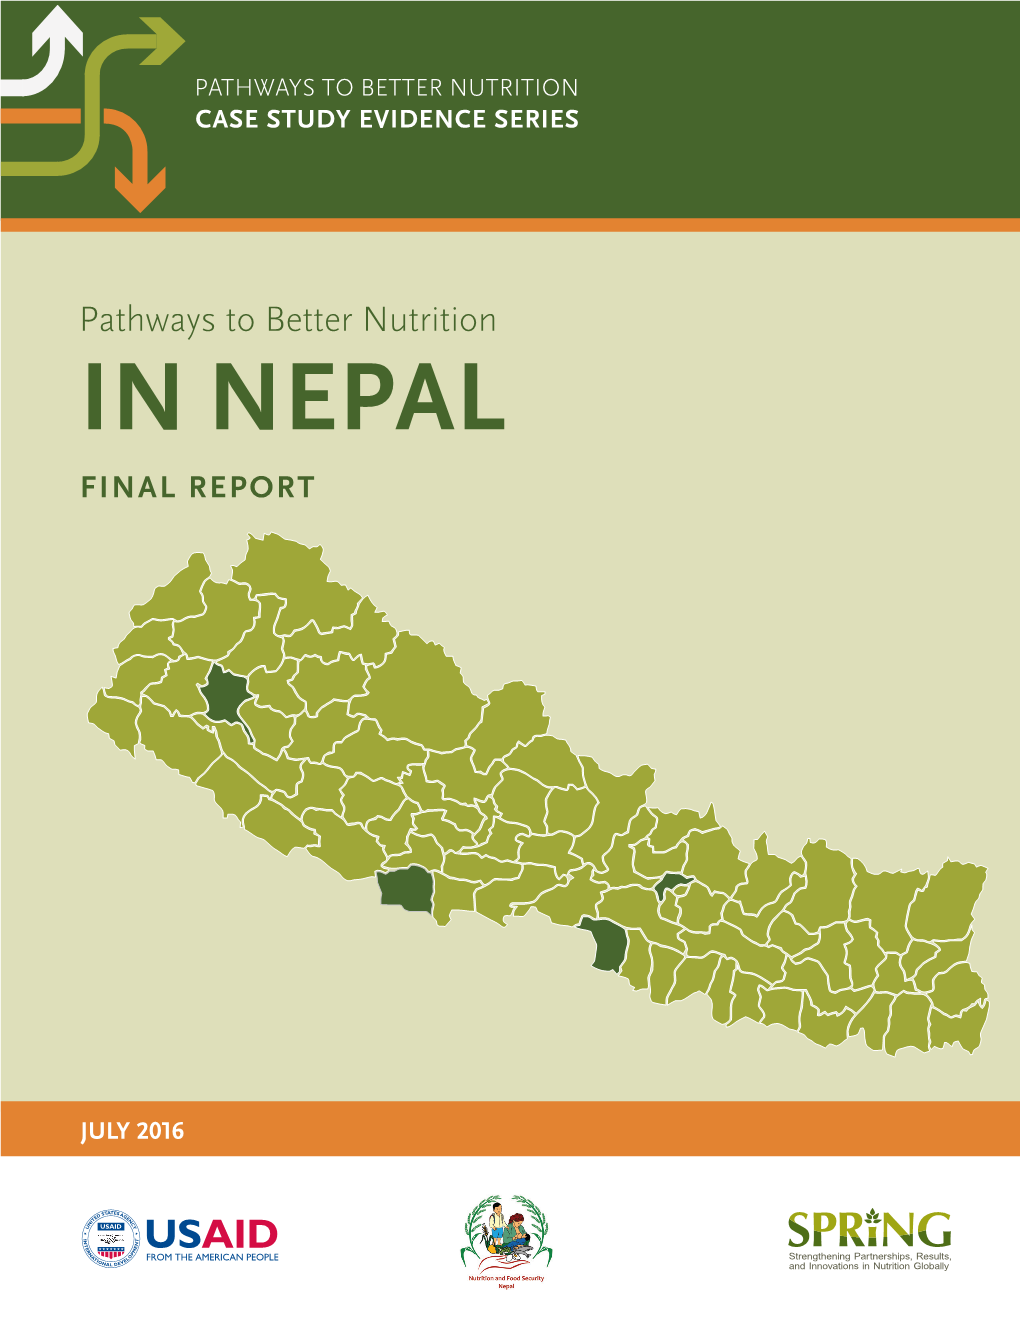 Pathways to Better Nutrition in Nepal: Final Report